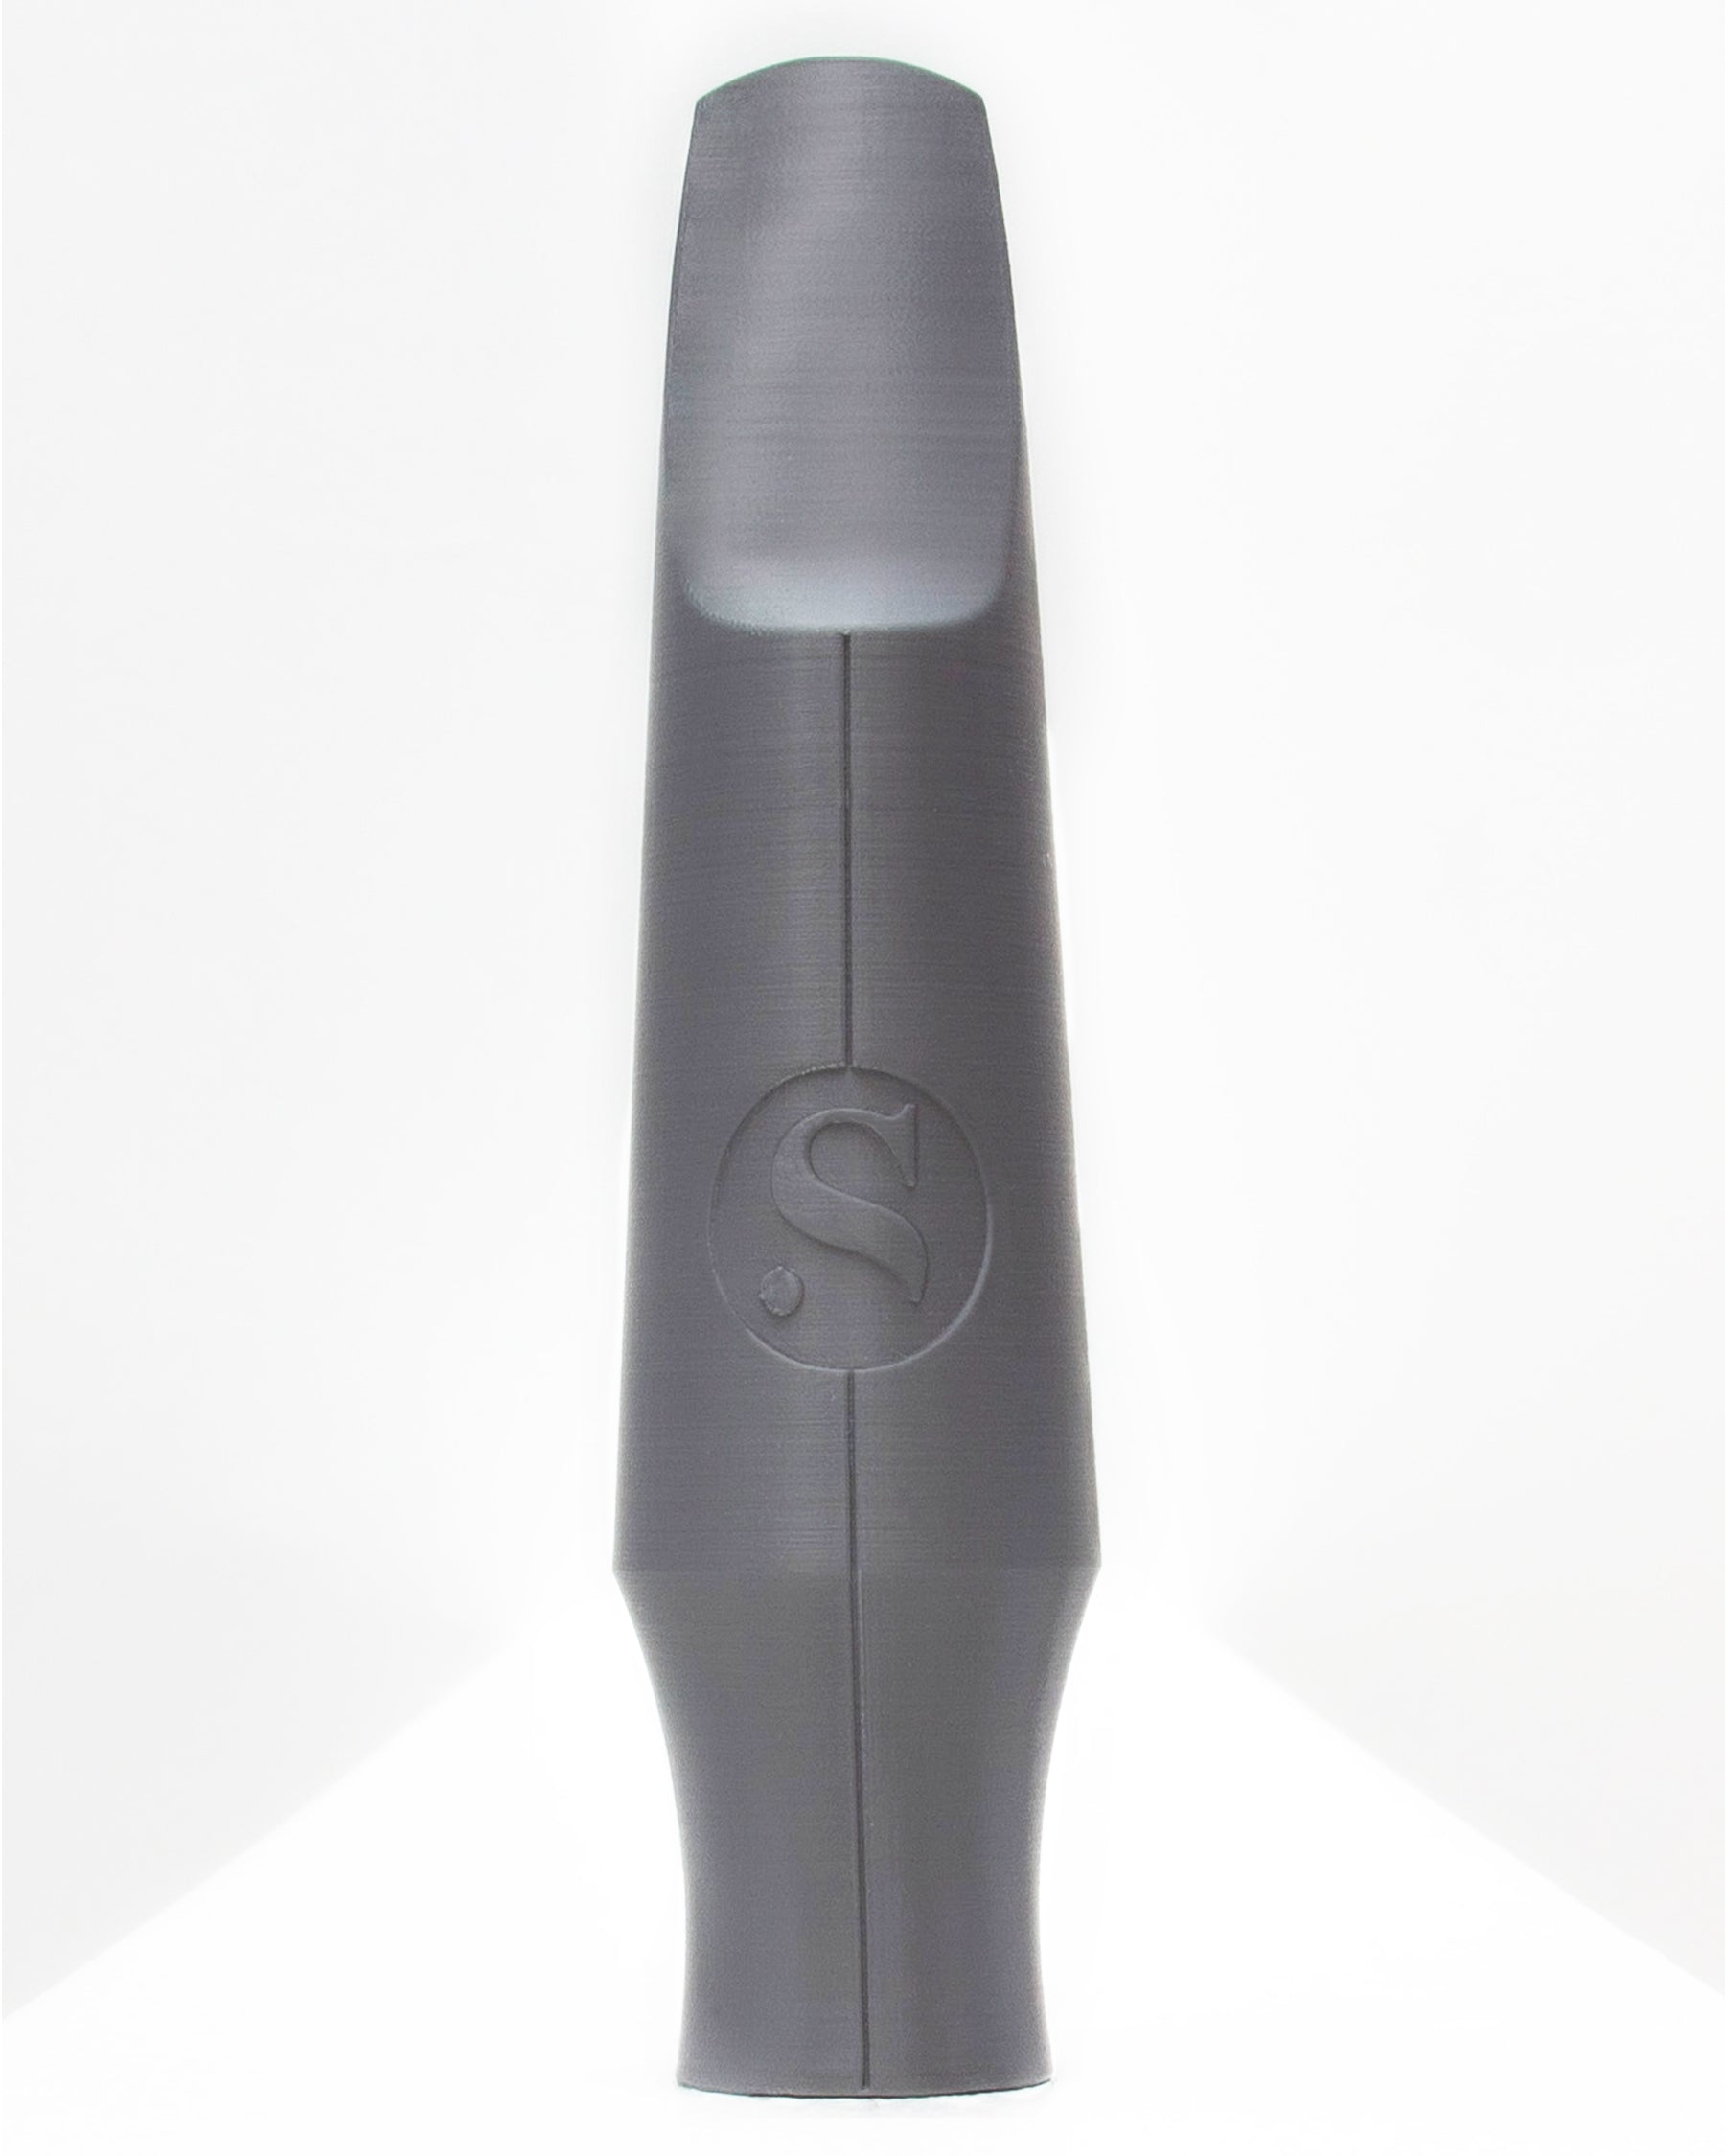 Baritone Originals Saxophone mouthpiece - Steady by Syos - 8 / Anthracite Metal